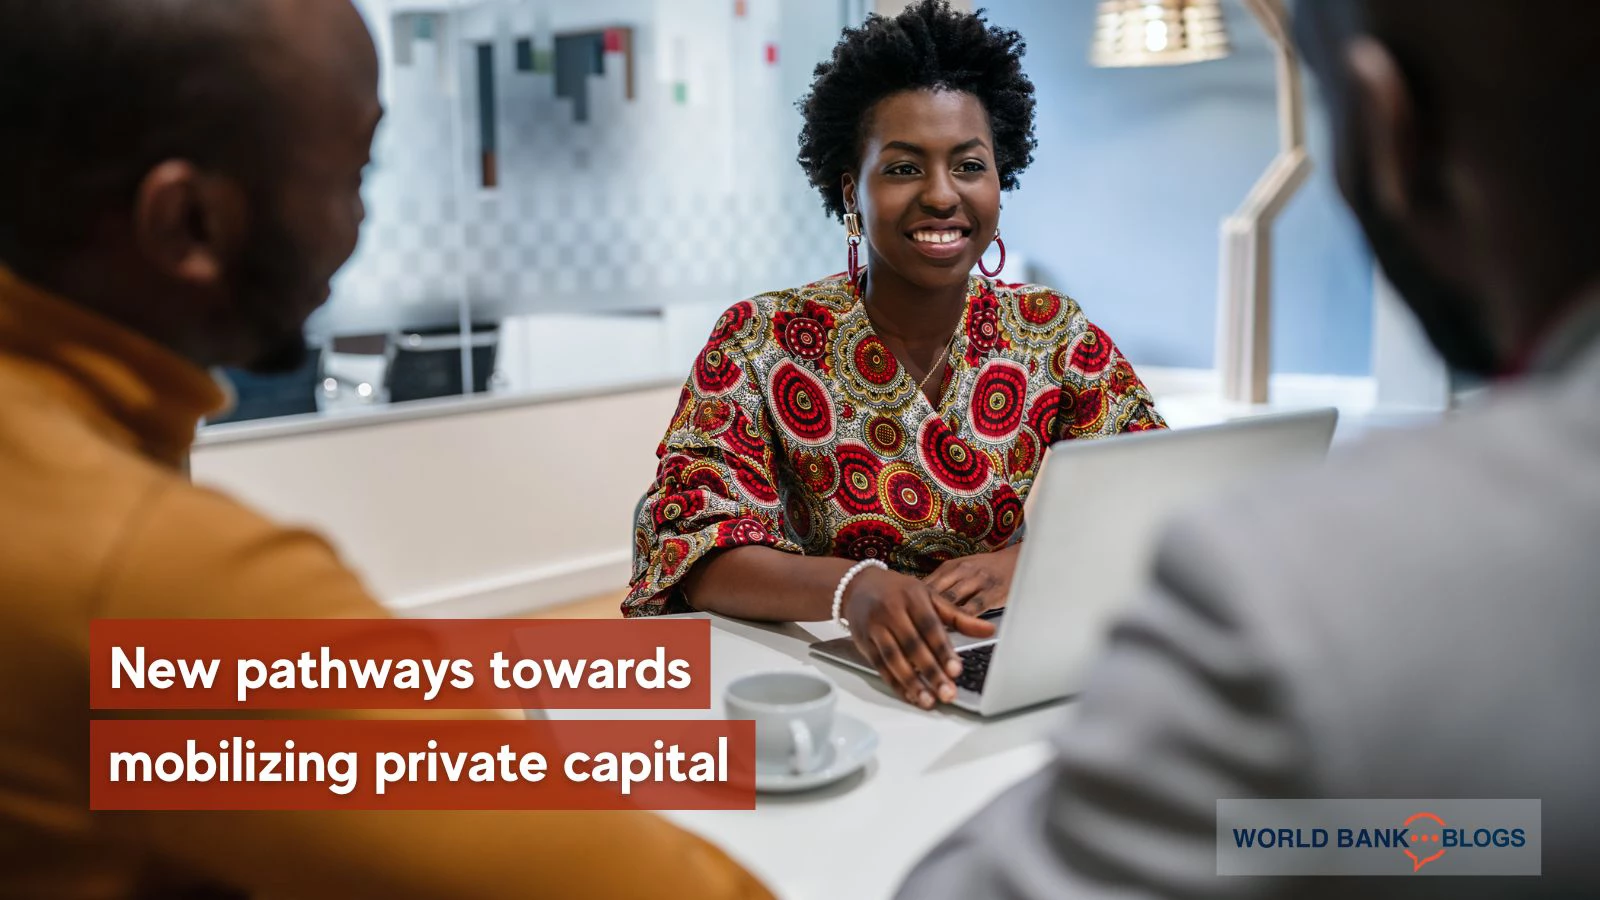 New pathways towards mobilizing private capital